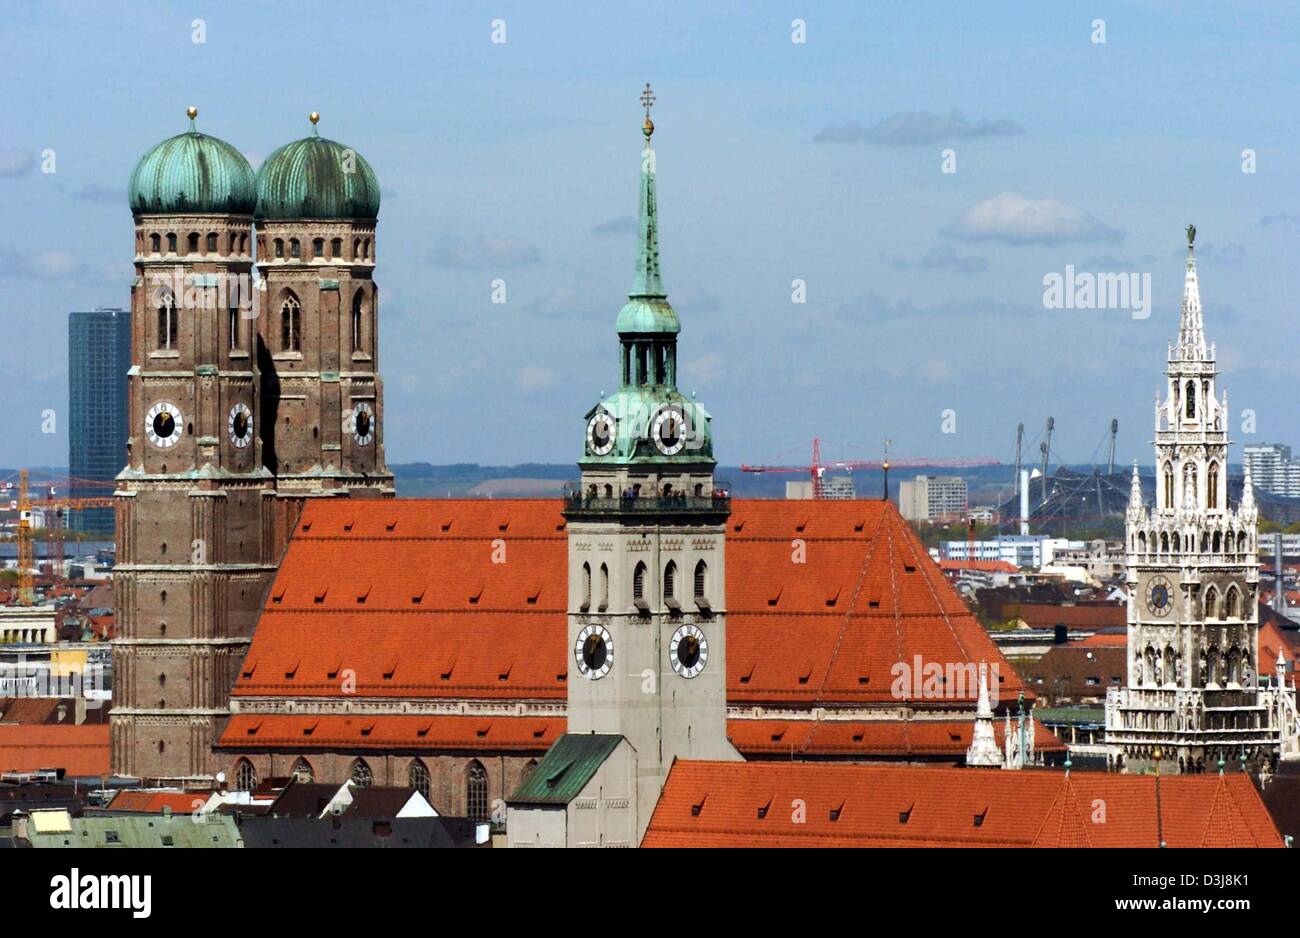 (dpa) - Aerial view of the Bavarian capital of Munich, Germany, 20 April 2004. The picture shows (from L to R) the twin towers of the Frauenkirche, the Pfarrkirche 'Alter Peter' (Old Peter) as well as the prominent tower of the Neues Rathaus (new city hall). Stock Photo